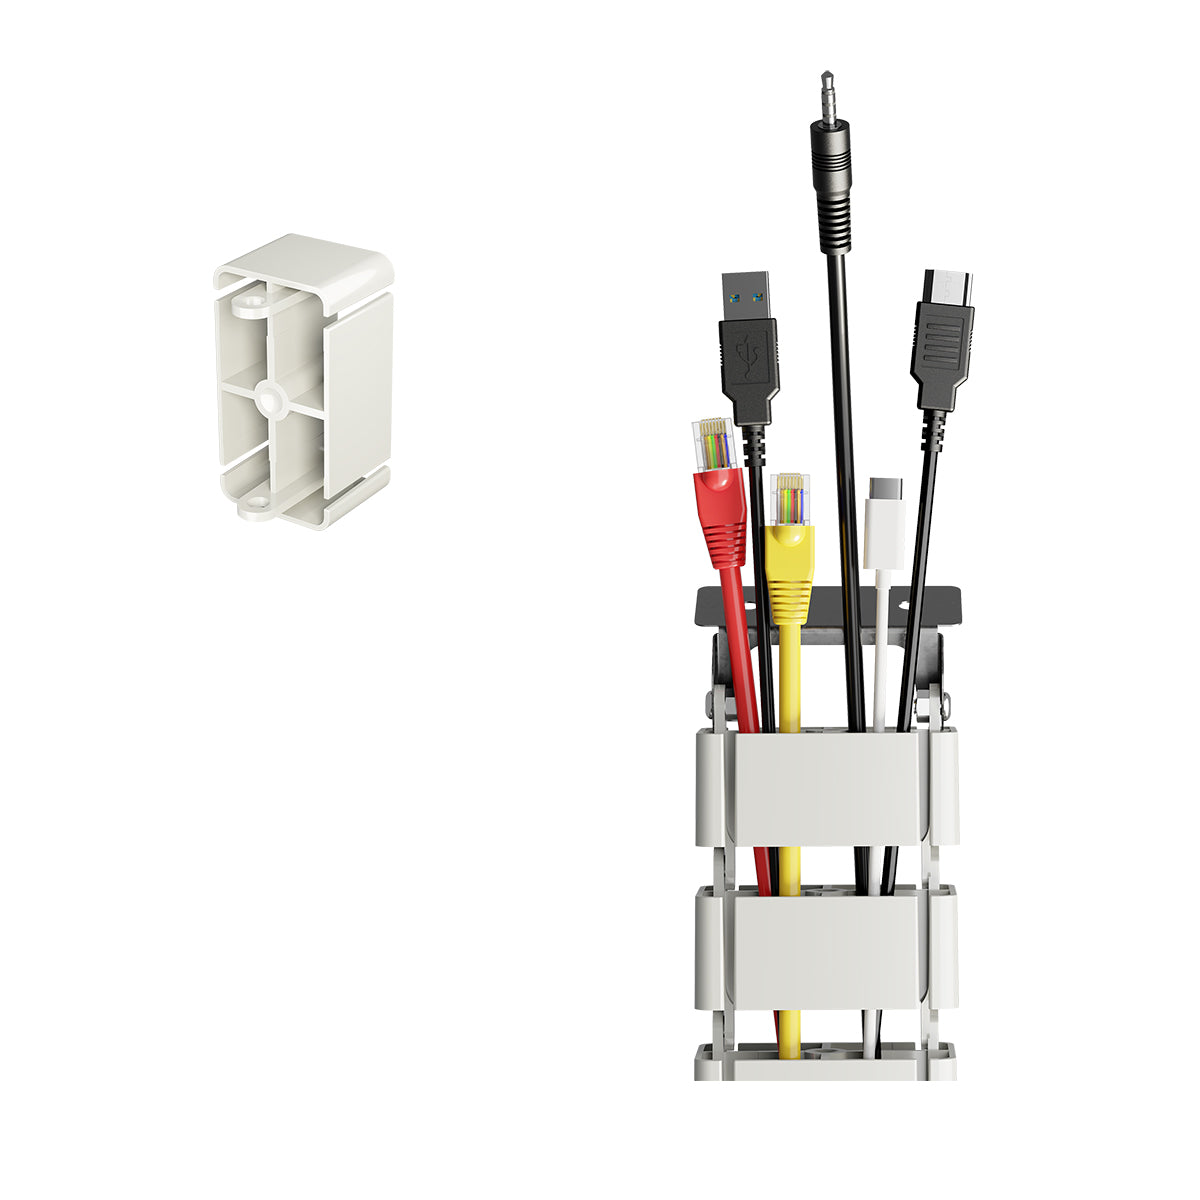 Maidesite cable spine with 4 way entry cable management, help you better organize the cables